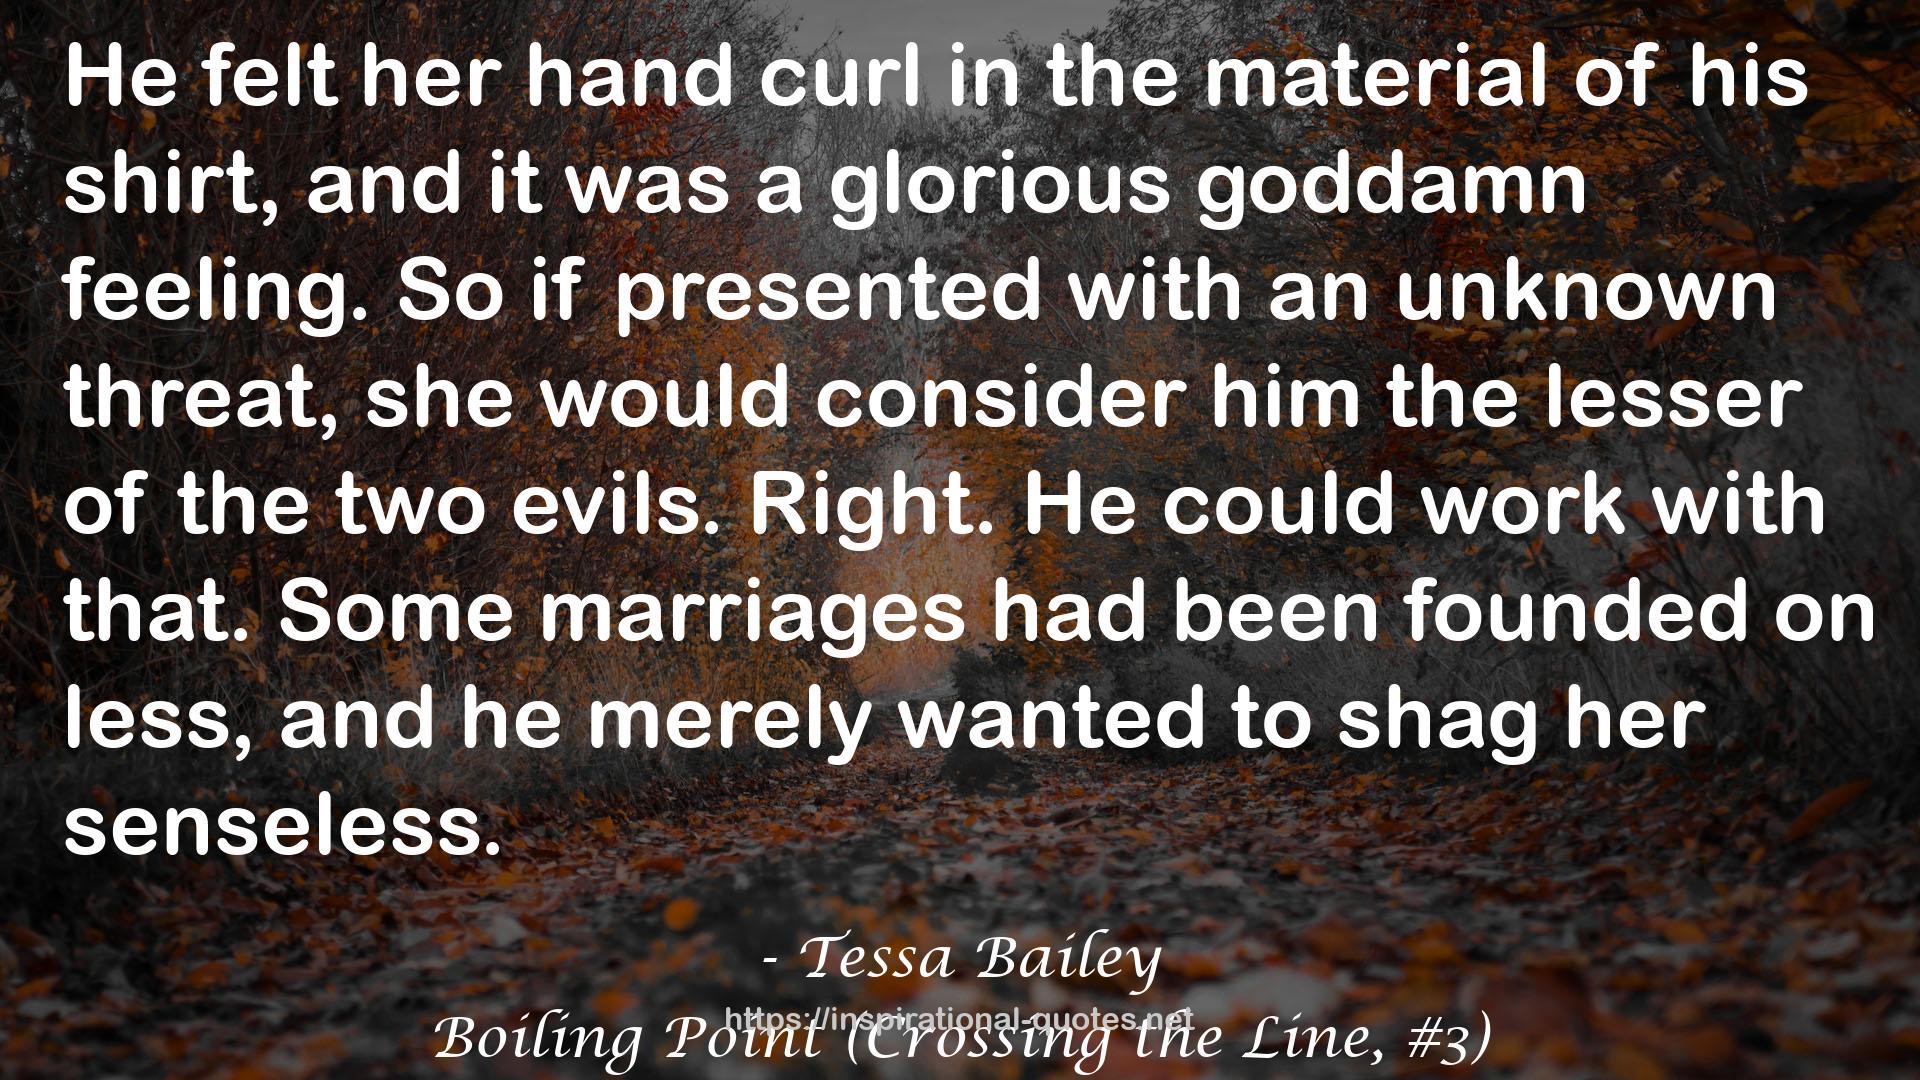 Boiling Point (Crossing the Line, #3) QUOTES